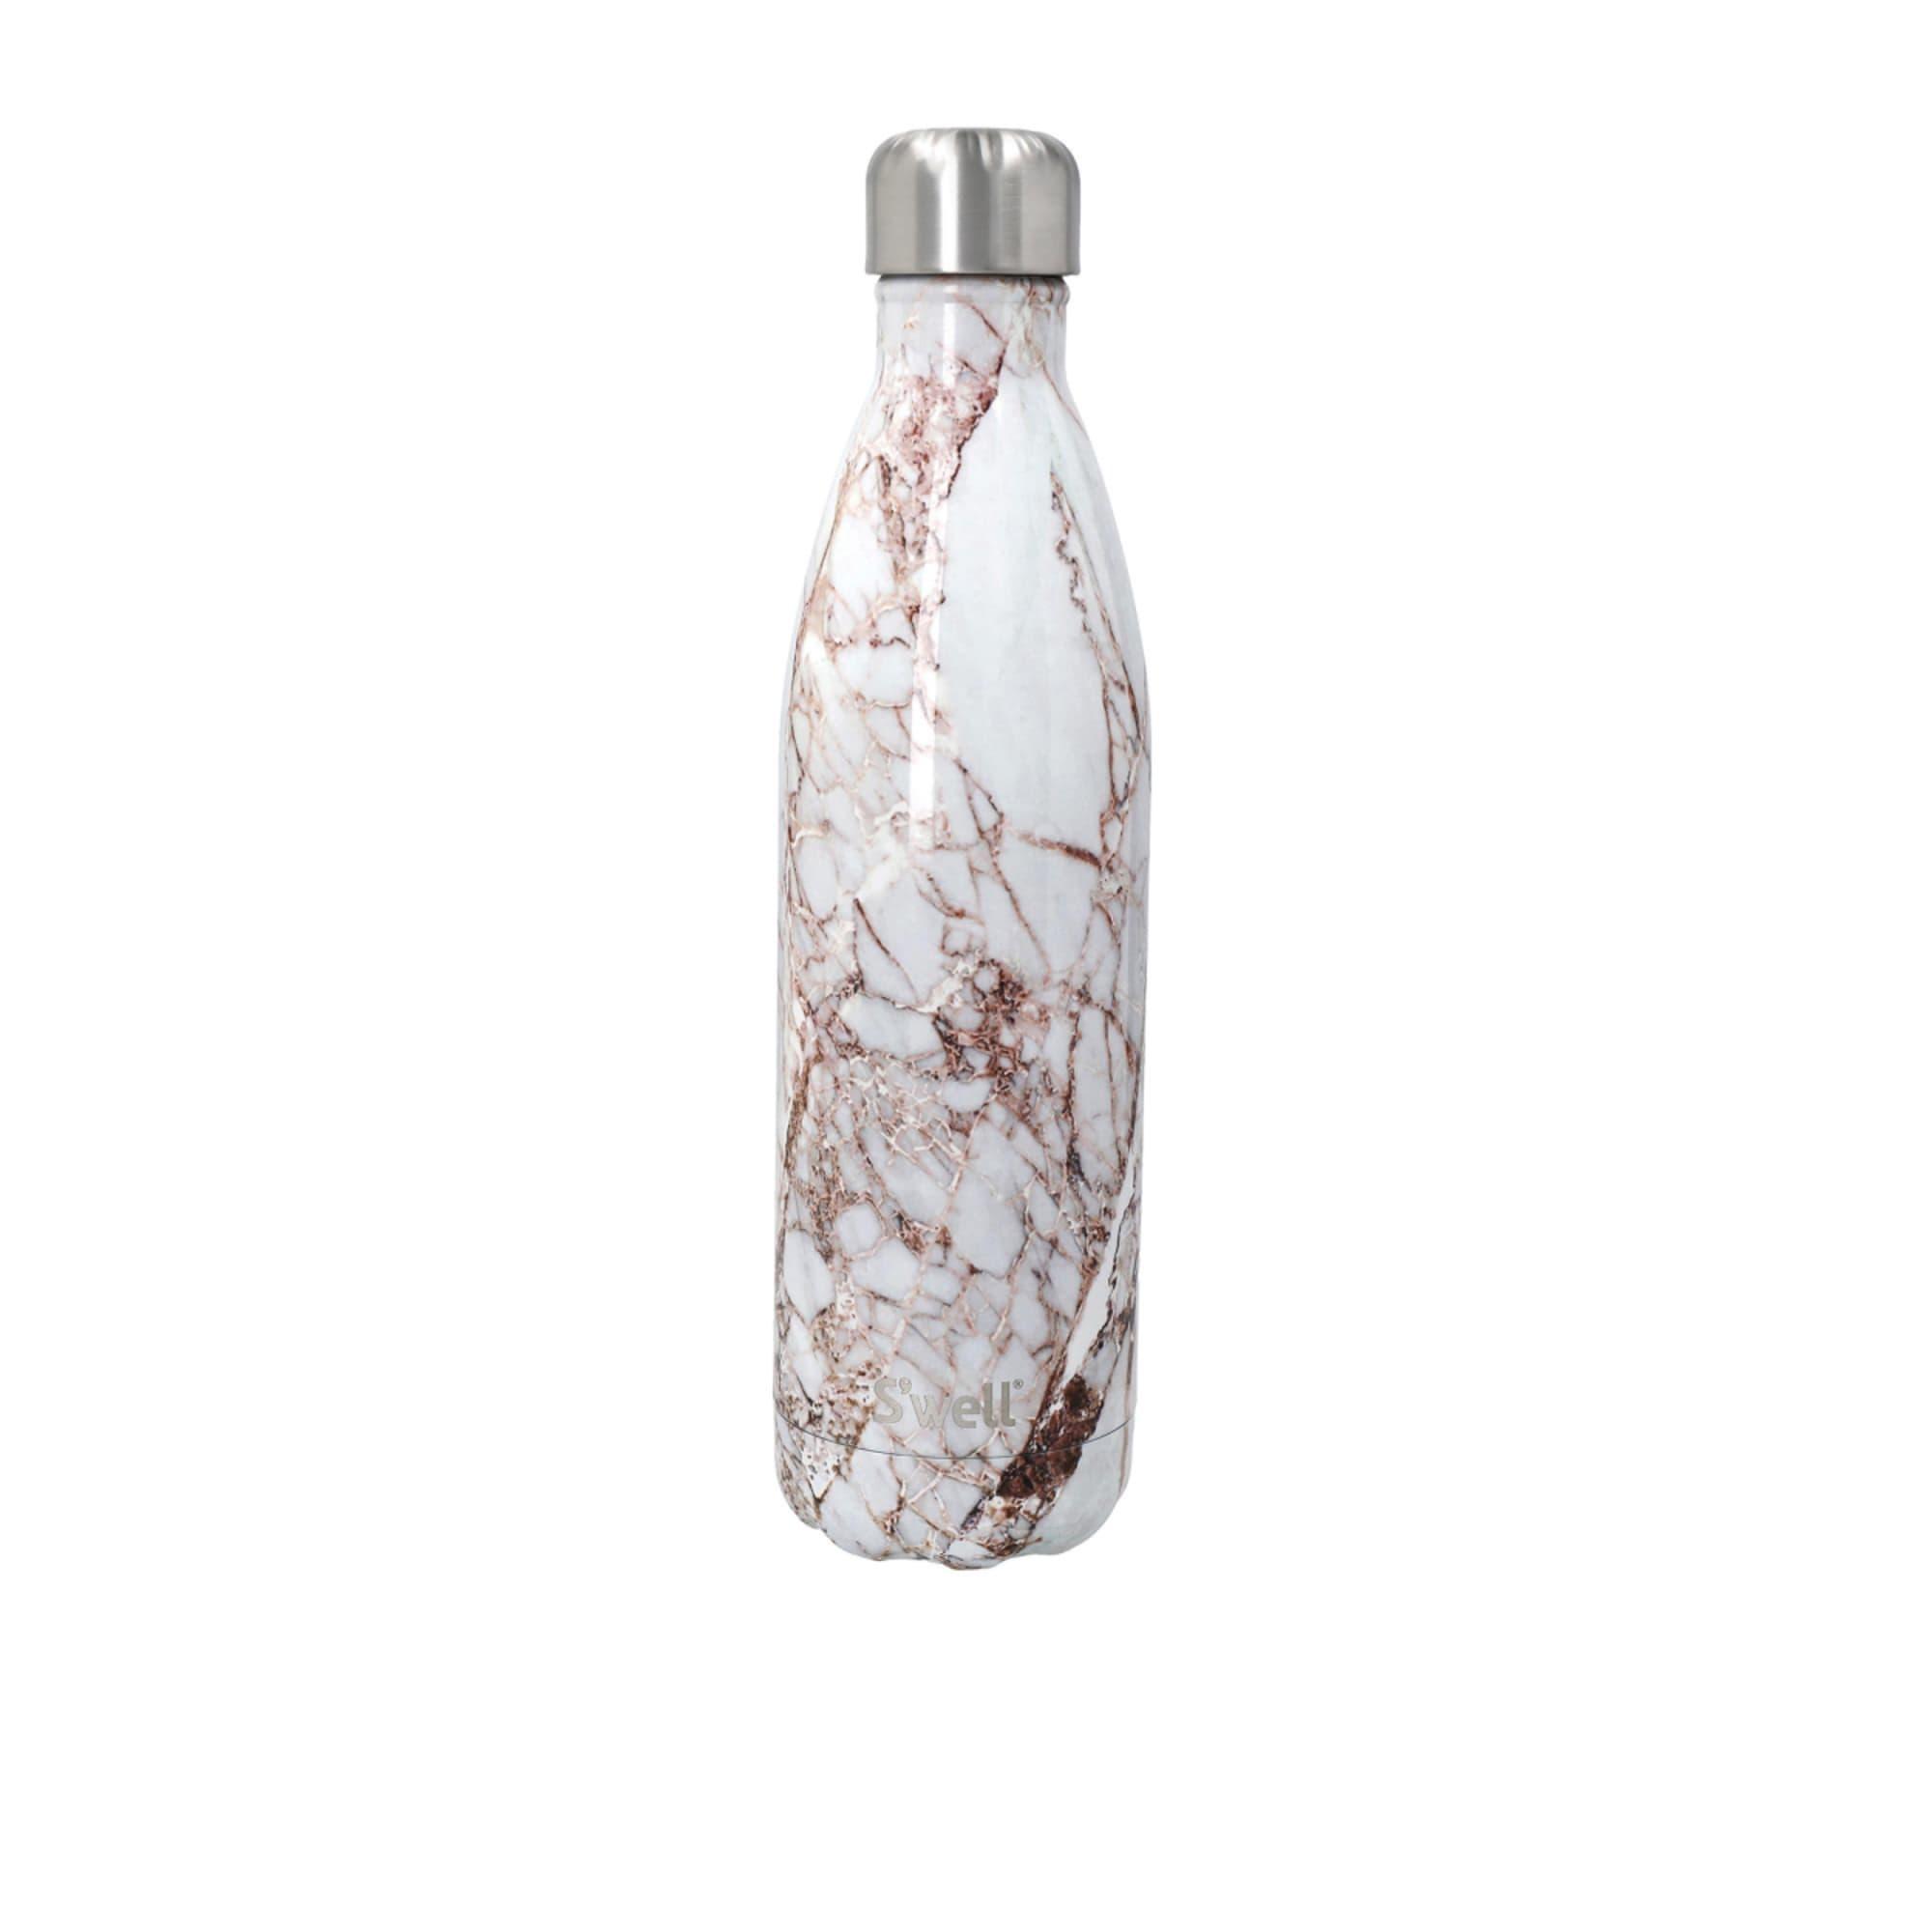 S'Well Insulated Bottle 750ml Calacatta Gold Image 1